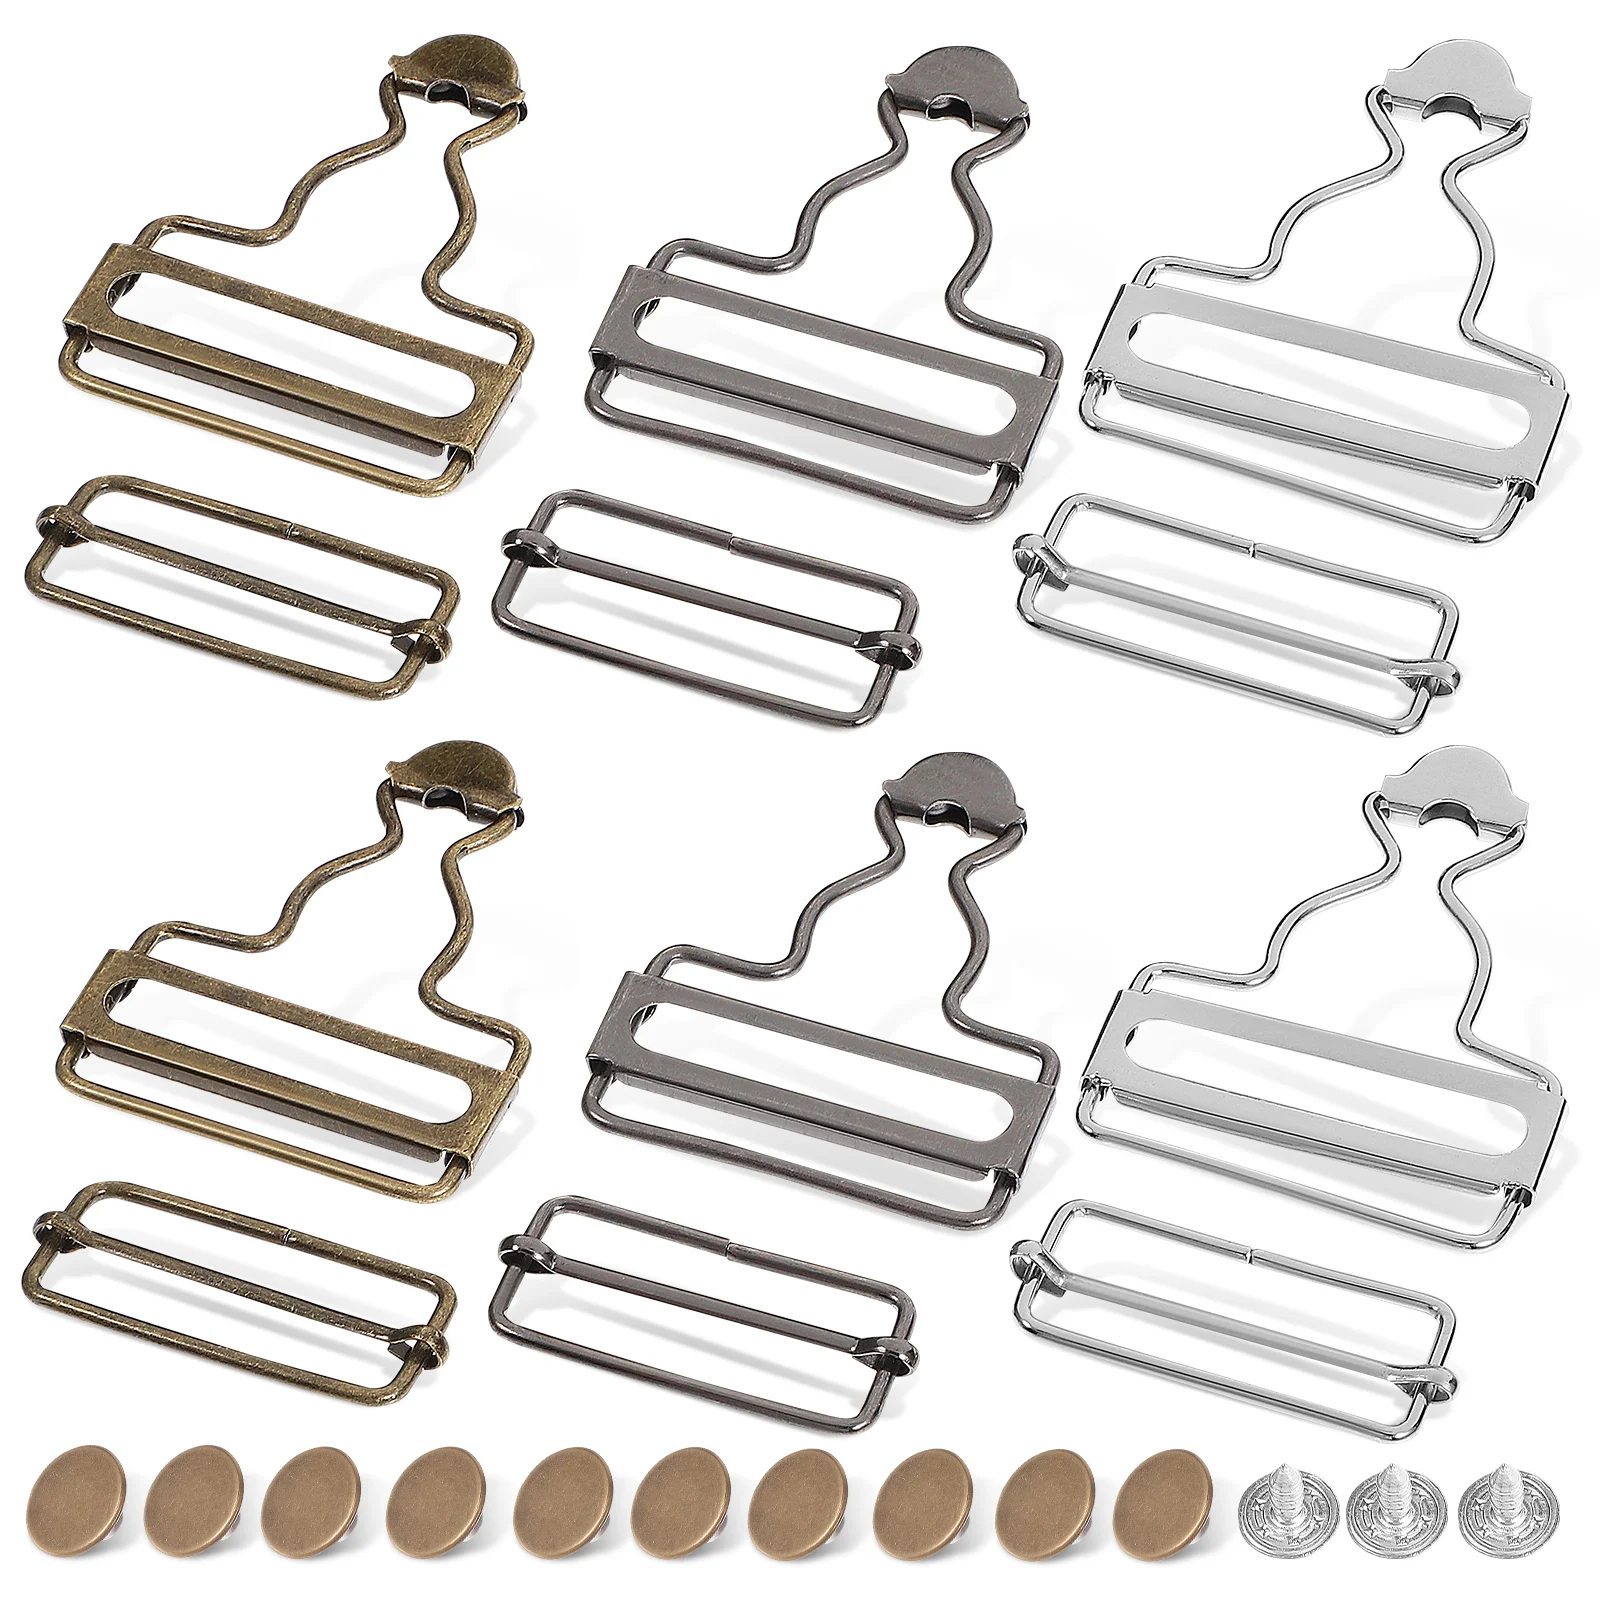 4 Sets overall clasp replacement Hooks for Overalls Buckles Metal